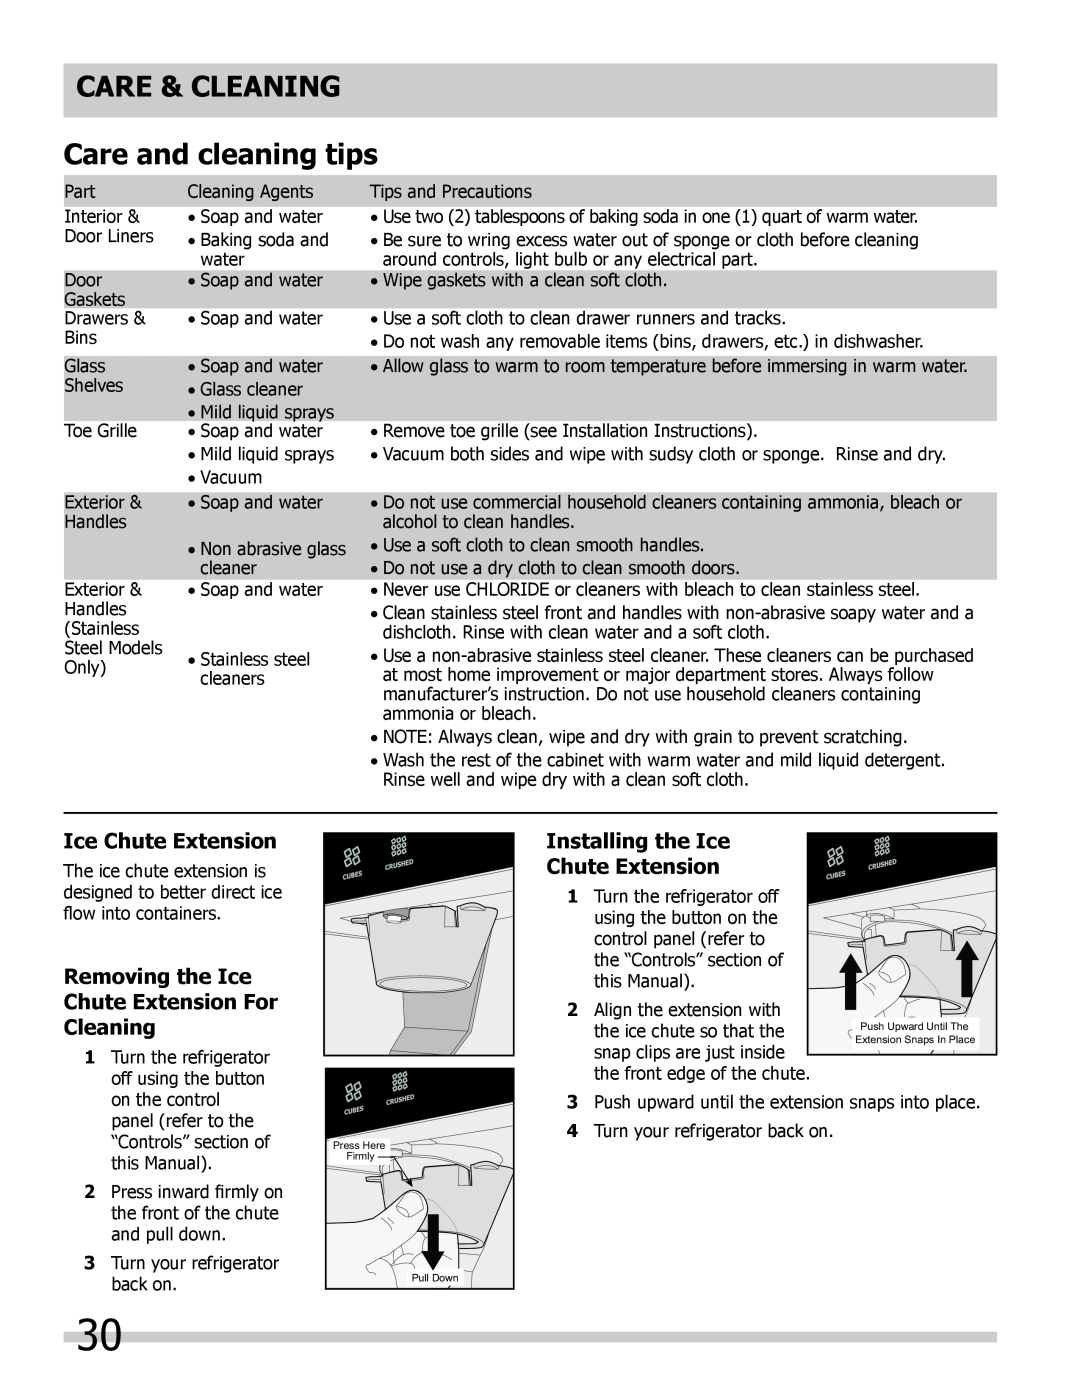 Frigidaire FGHB2846LM, FGHB2869LE CARE & CLEANING Care and cleaning tips, Installing the Ice Chute Extension 